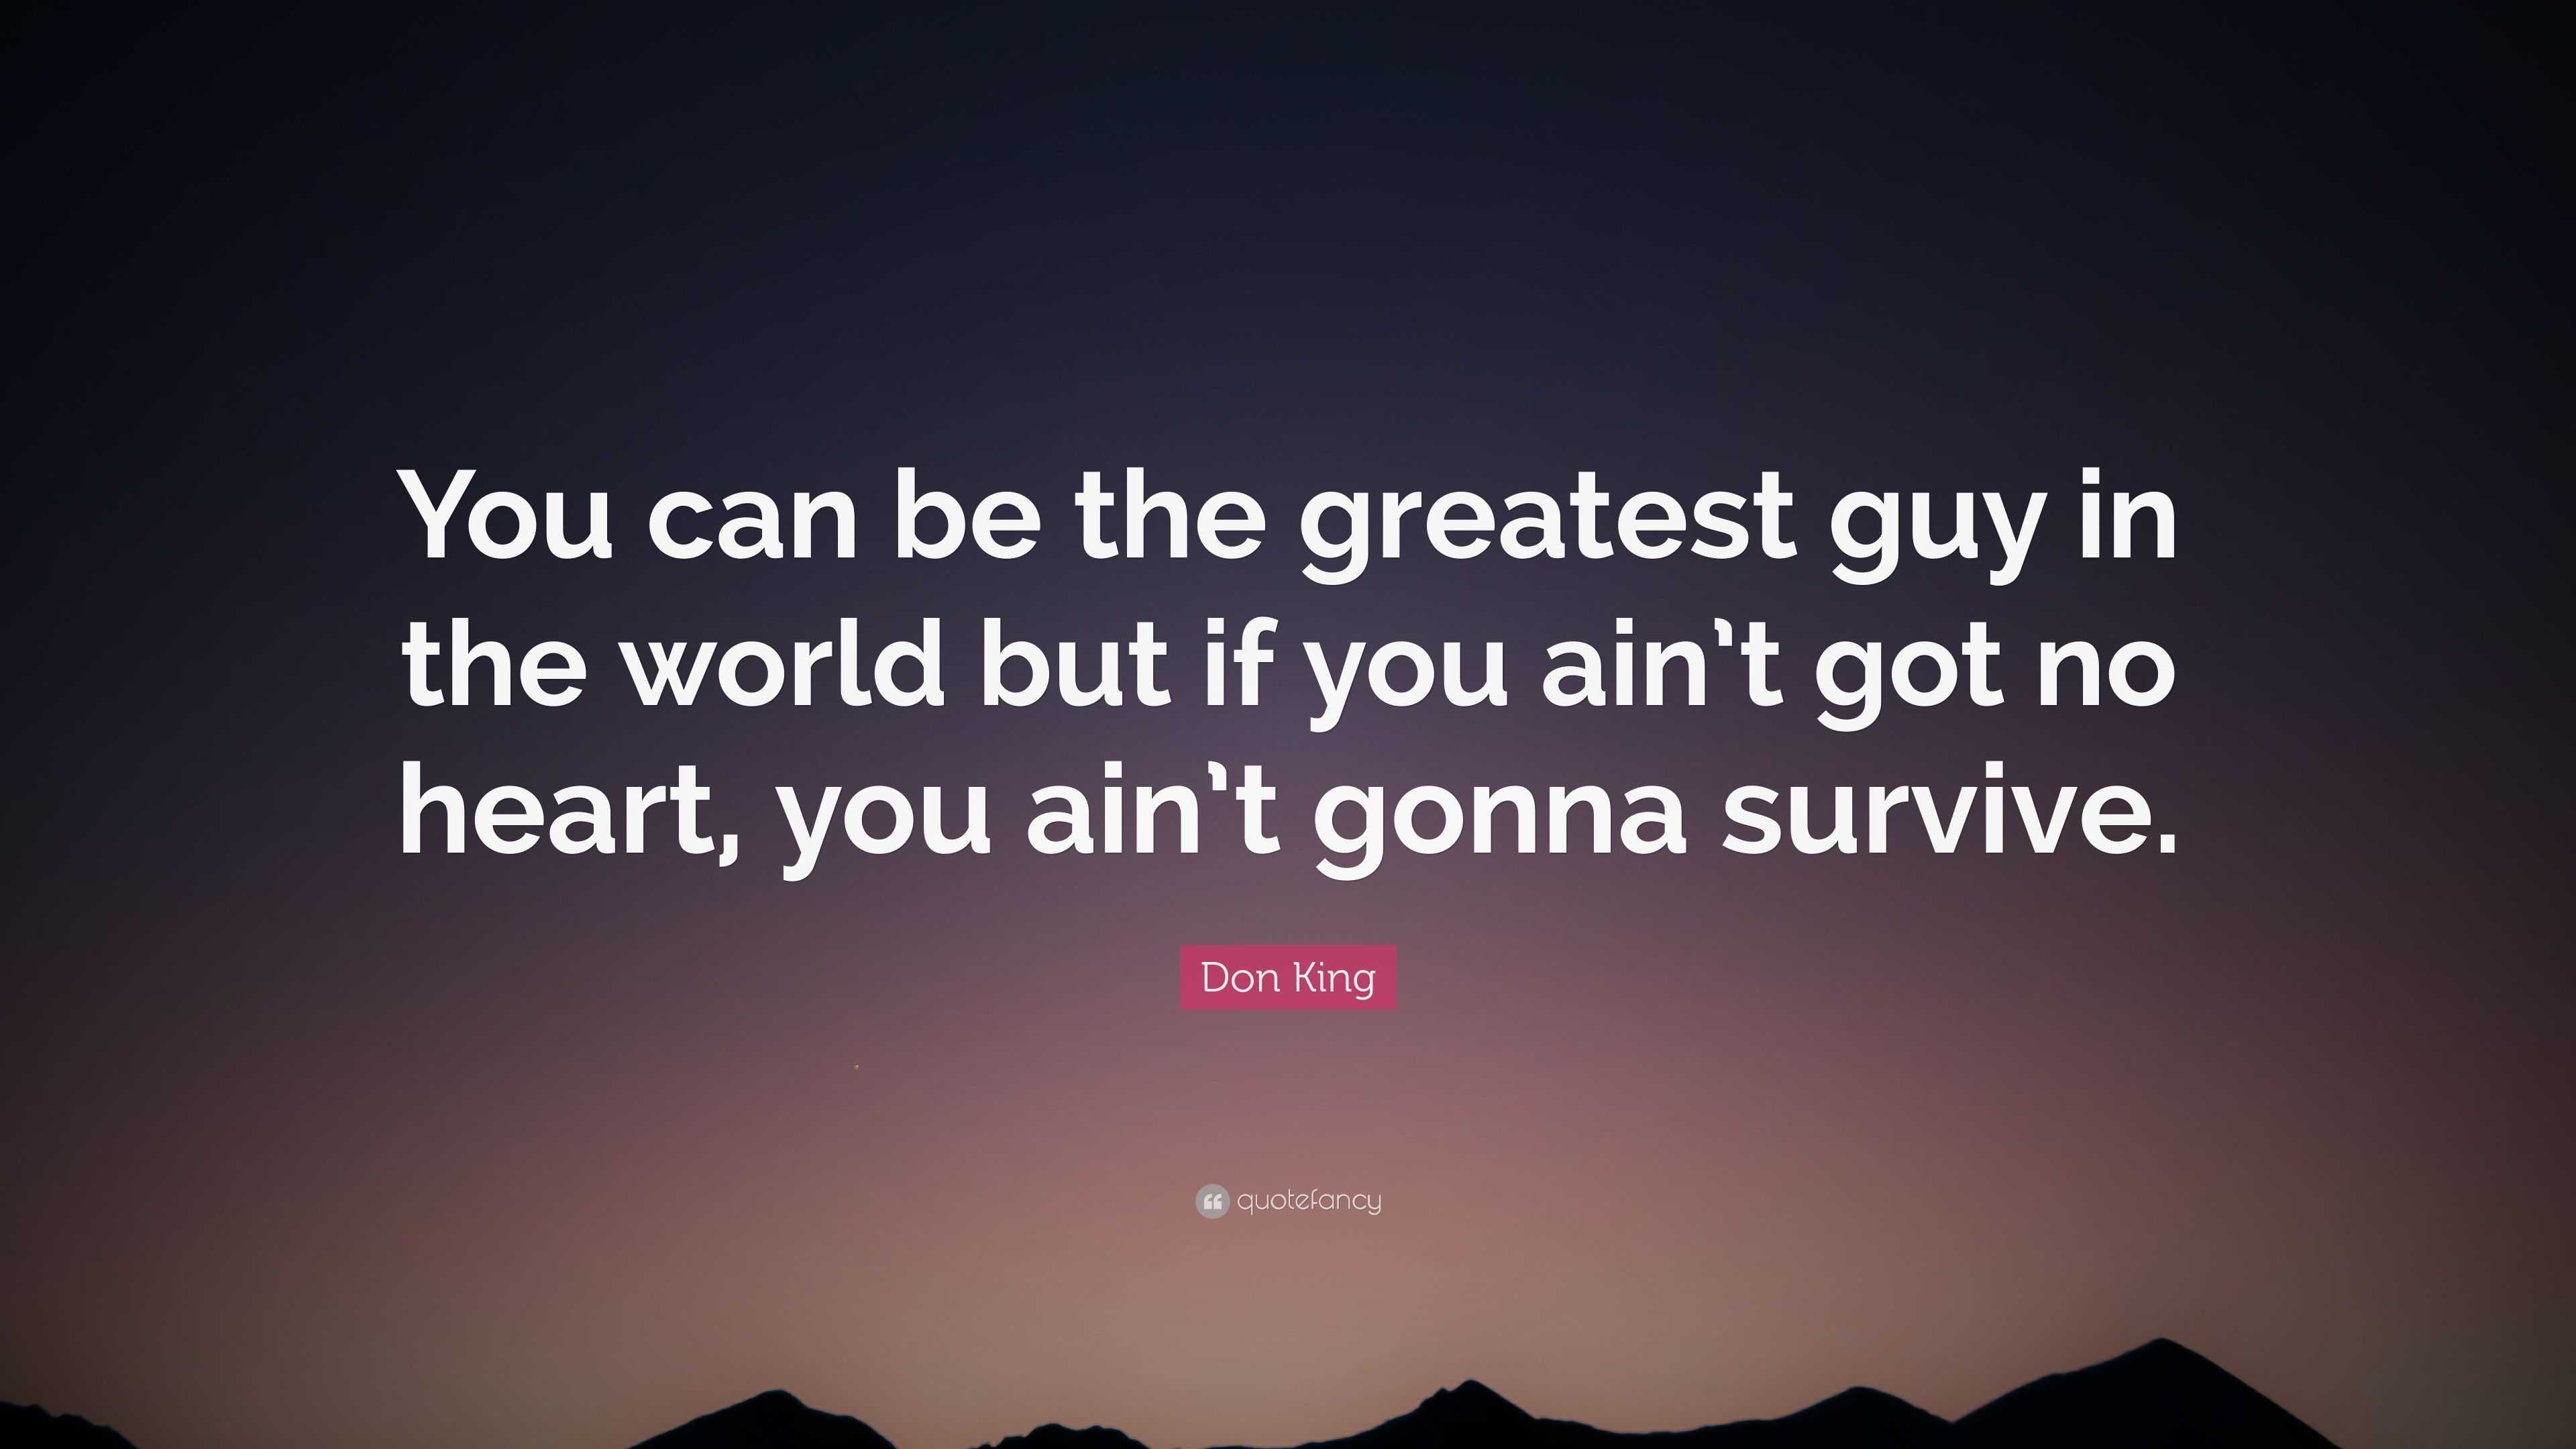 Don King Quote: “You can be the greatest guy in the world but if you ain